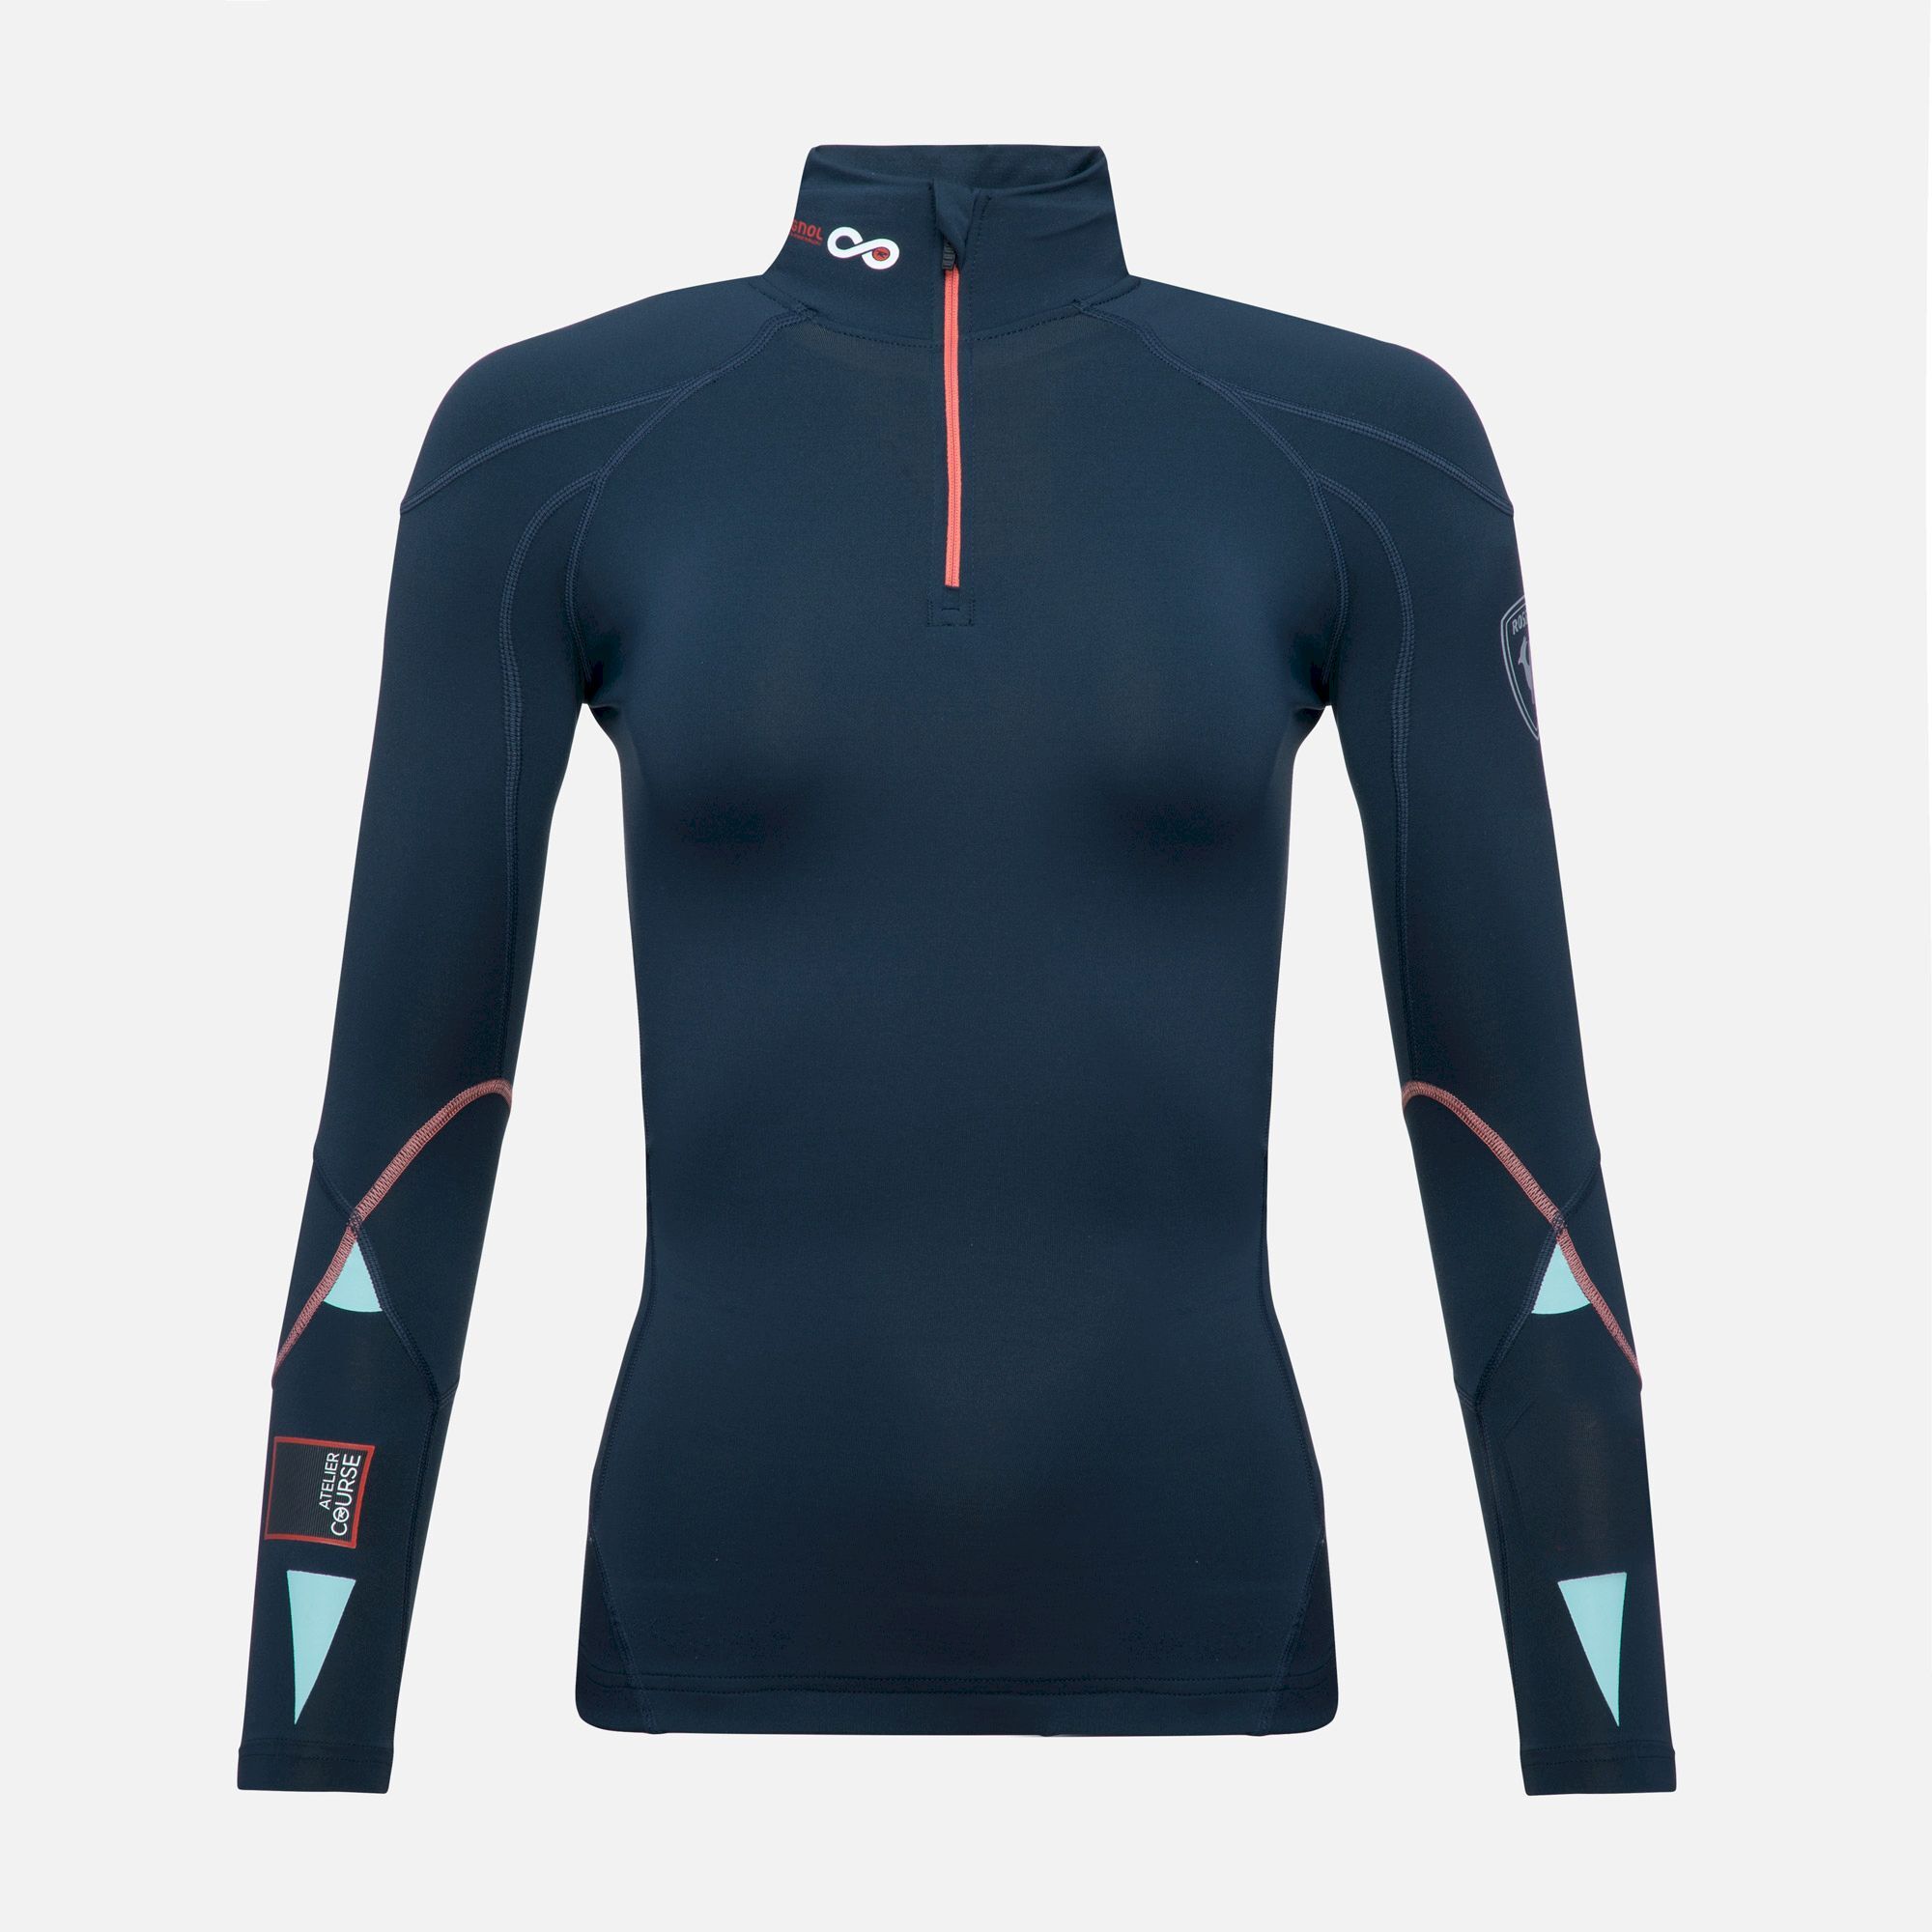 Infini Compression Race Top - Base layer - Women's